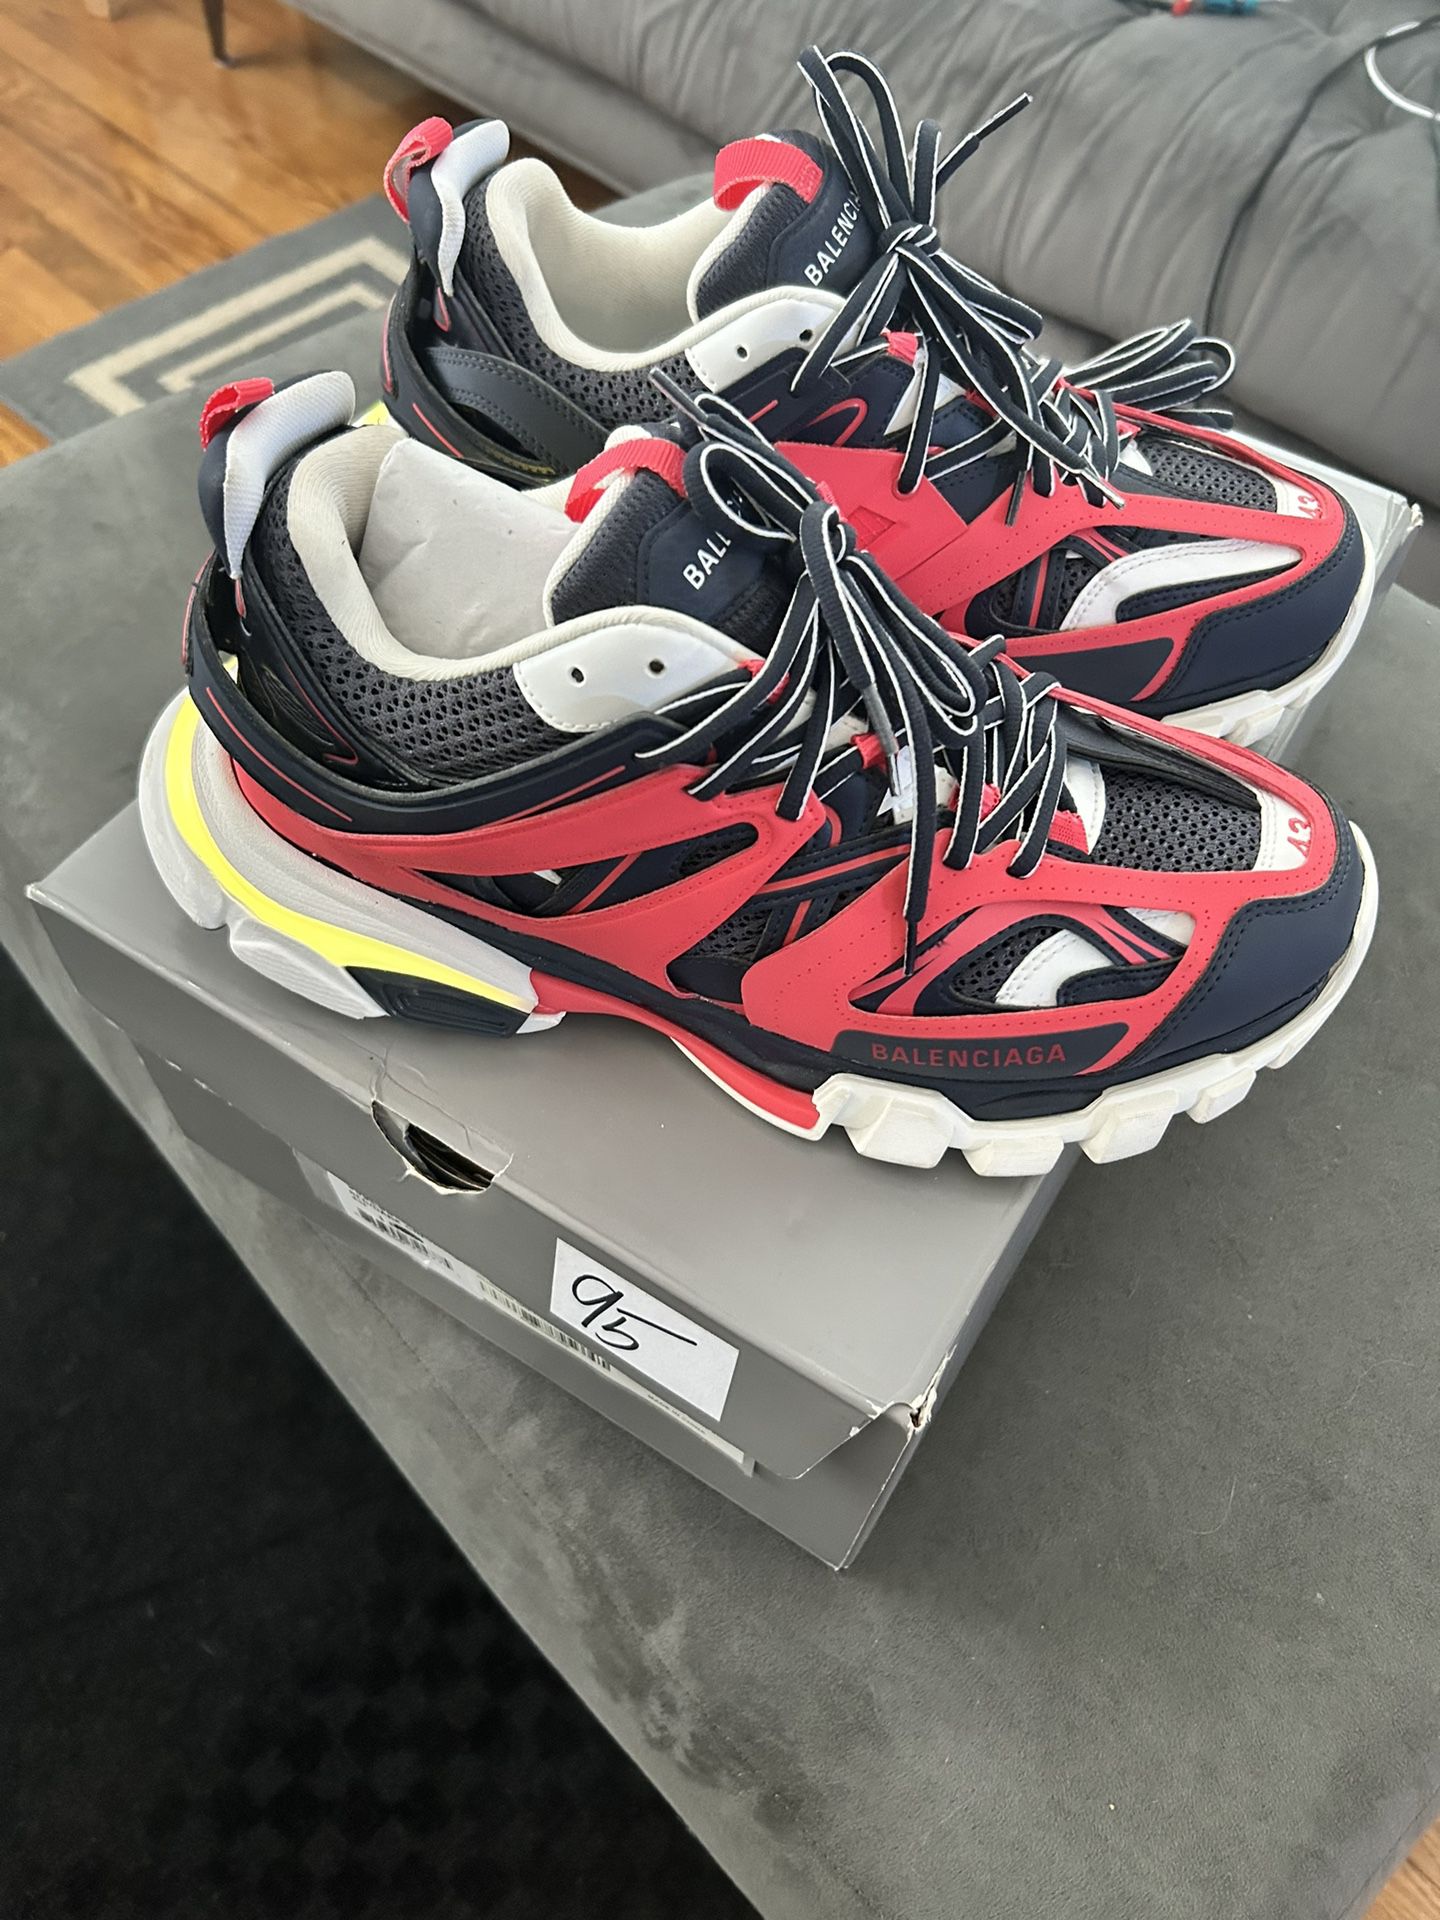 Red Balenciaga Track for Sale in Knoxville, TN - OfferUp